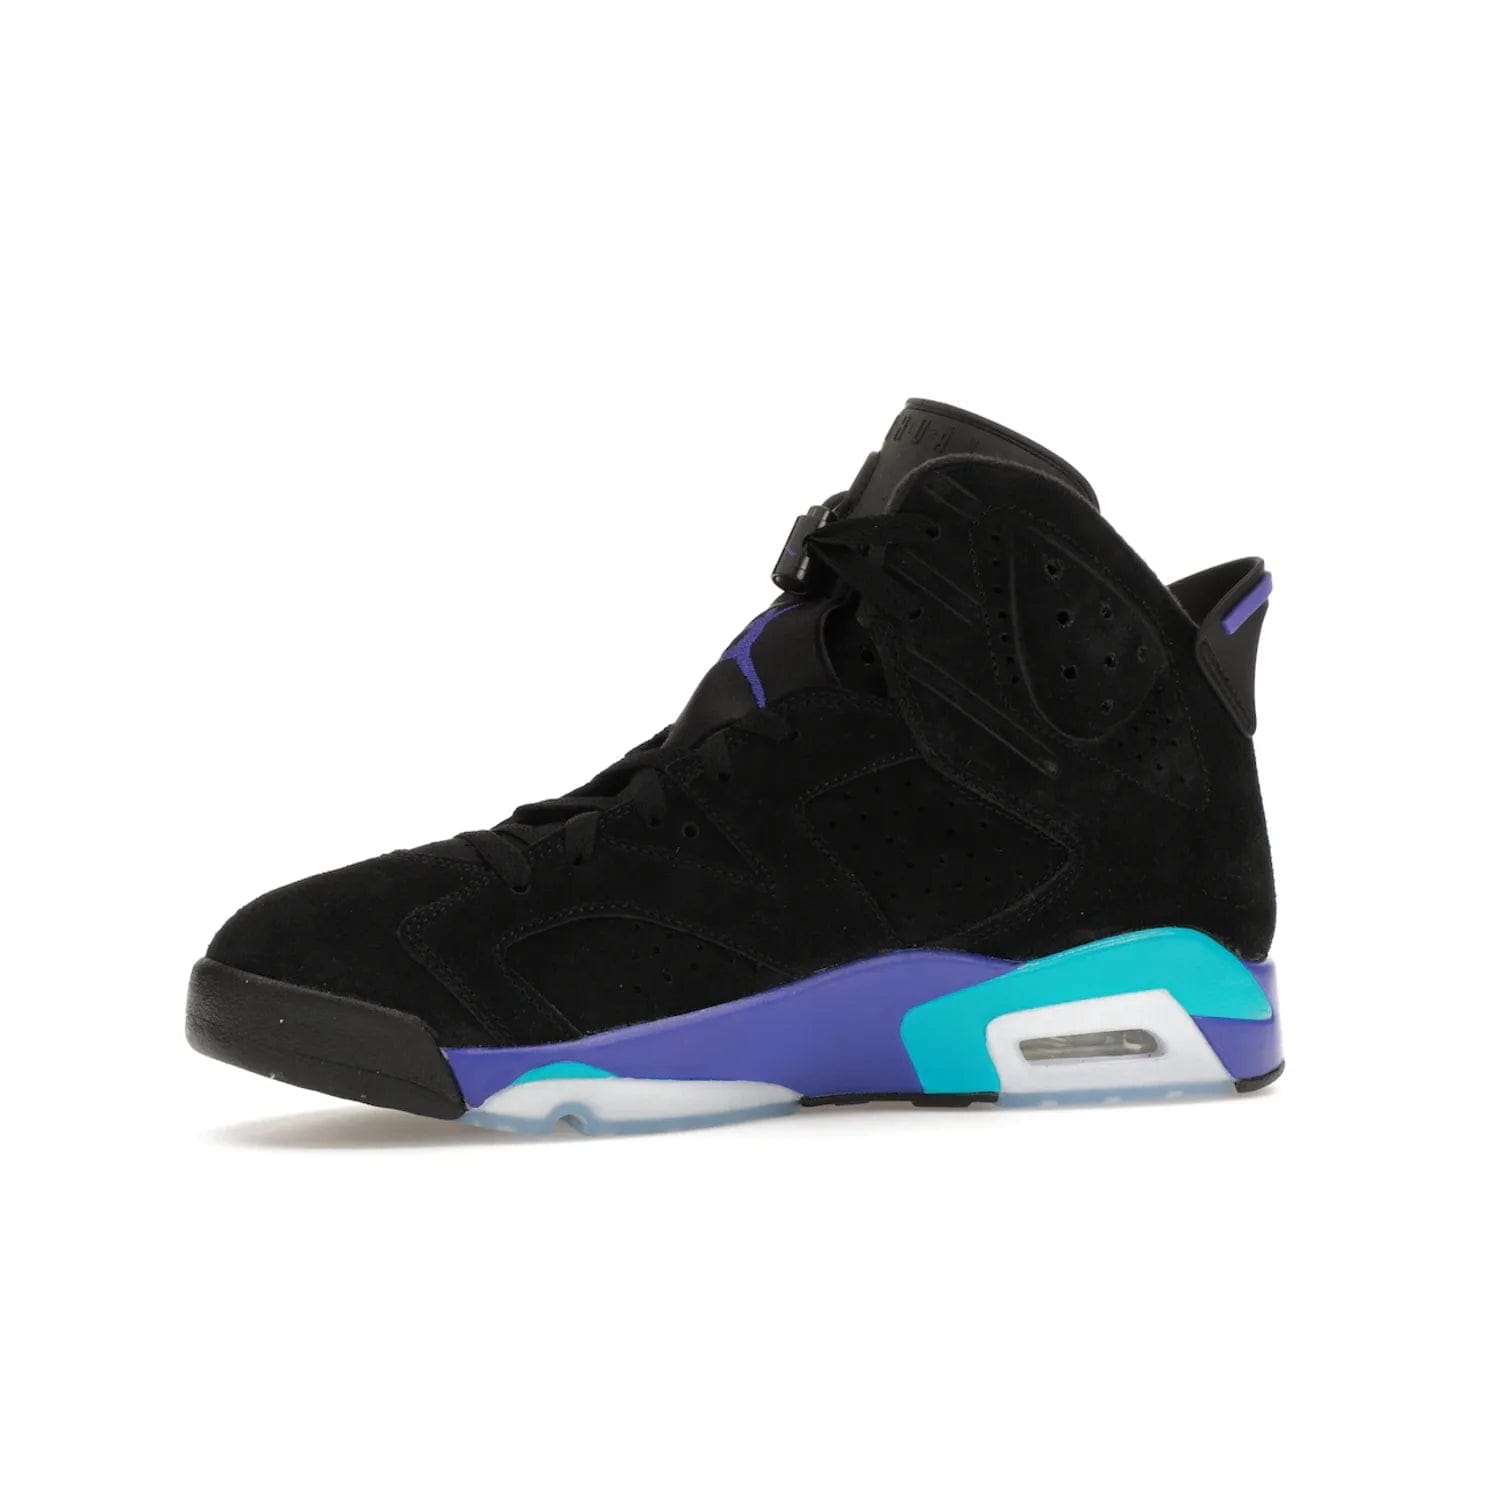 Jordan 6 Retro Aqua - Image 17 - Only at www.BallersClubKickz.com - Feel the classic Jordan 6 Retro Aqua paired with modern style. Black, Bright Concord, and Aquatone hues are crafted with a supple suede and rubberized heel tab. This standout sneaker adds signature Jordan elements at $200. Elevate your style with the Jordan 6 Retro Aqua.